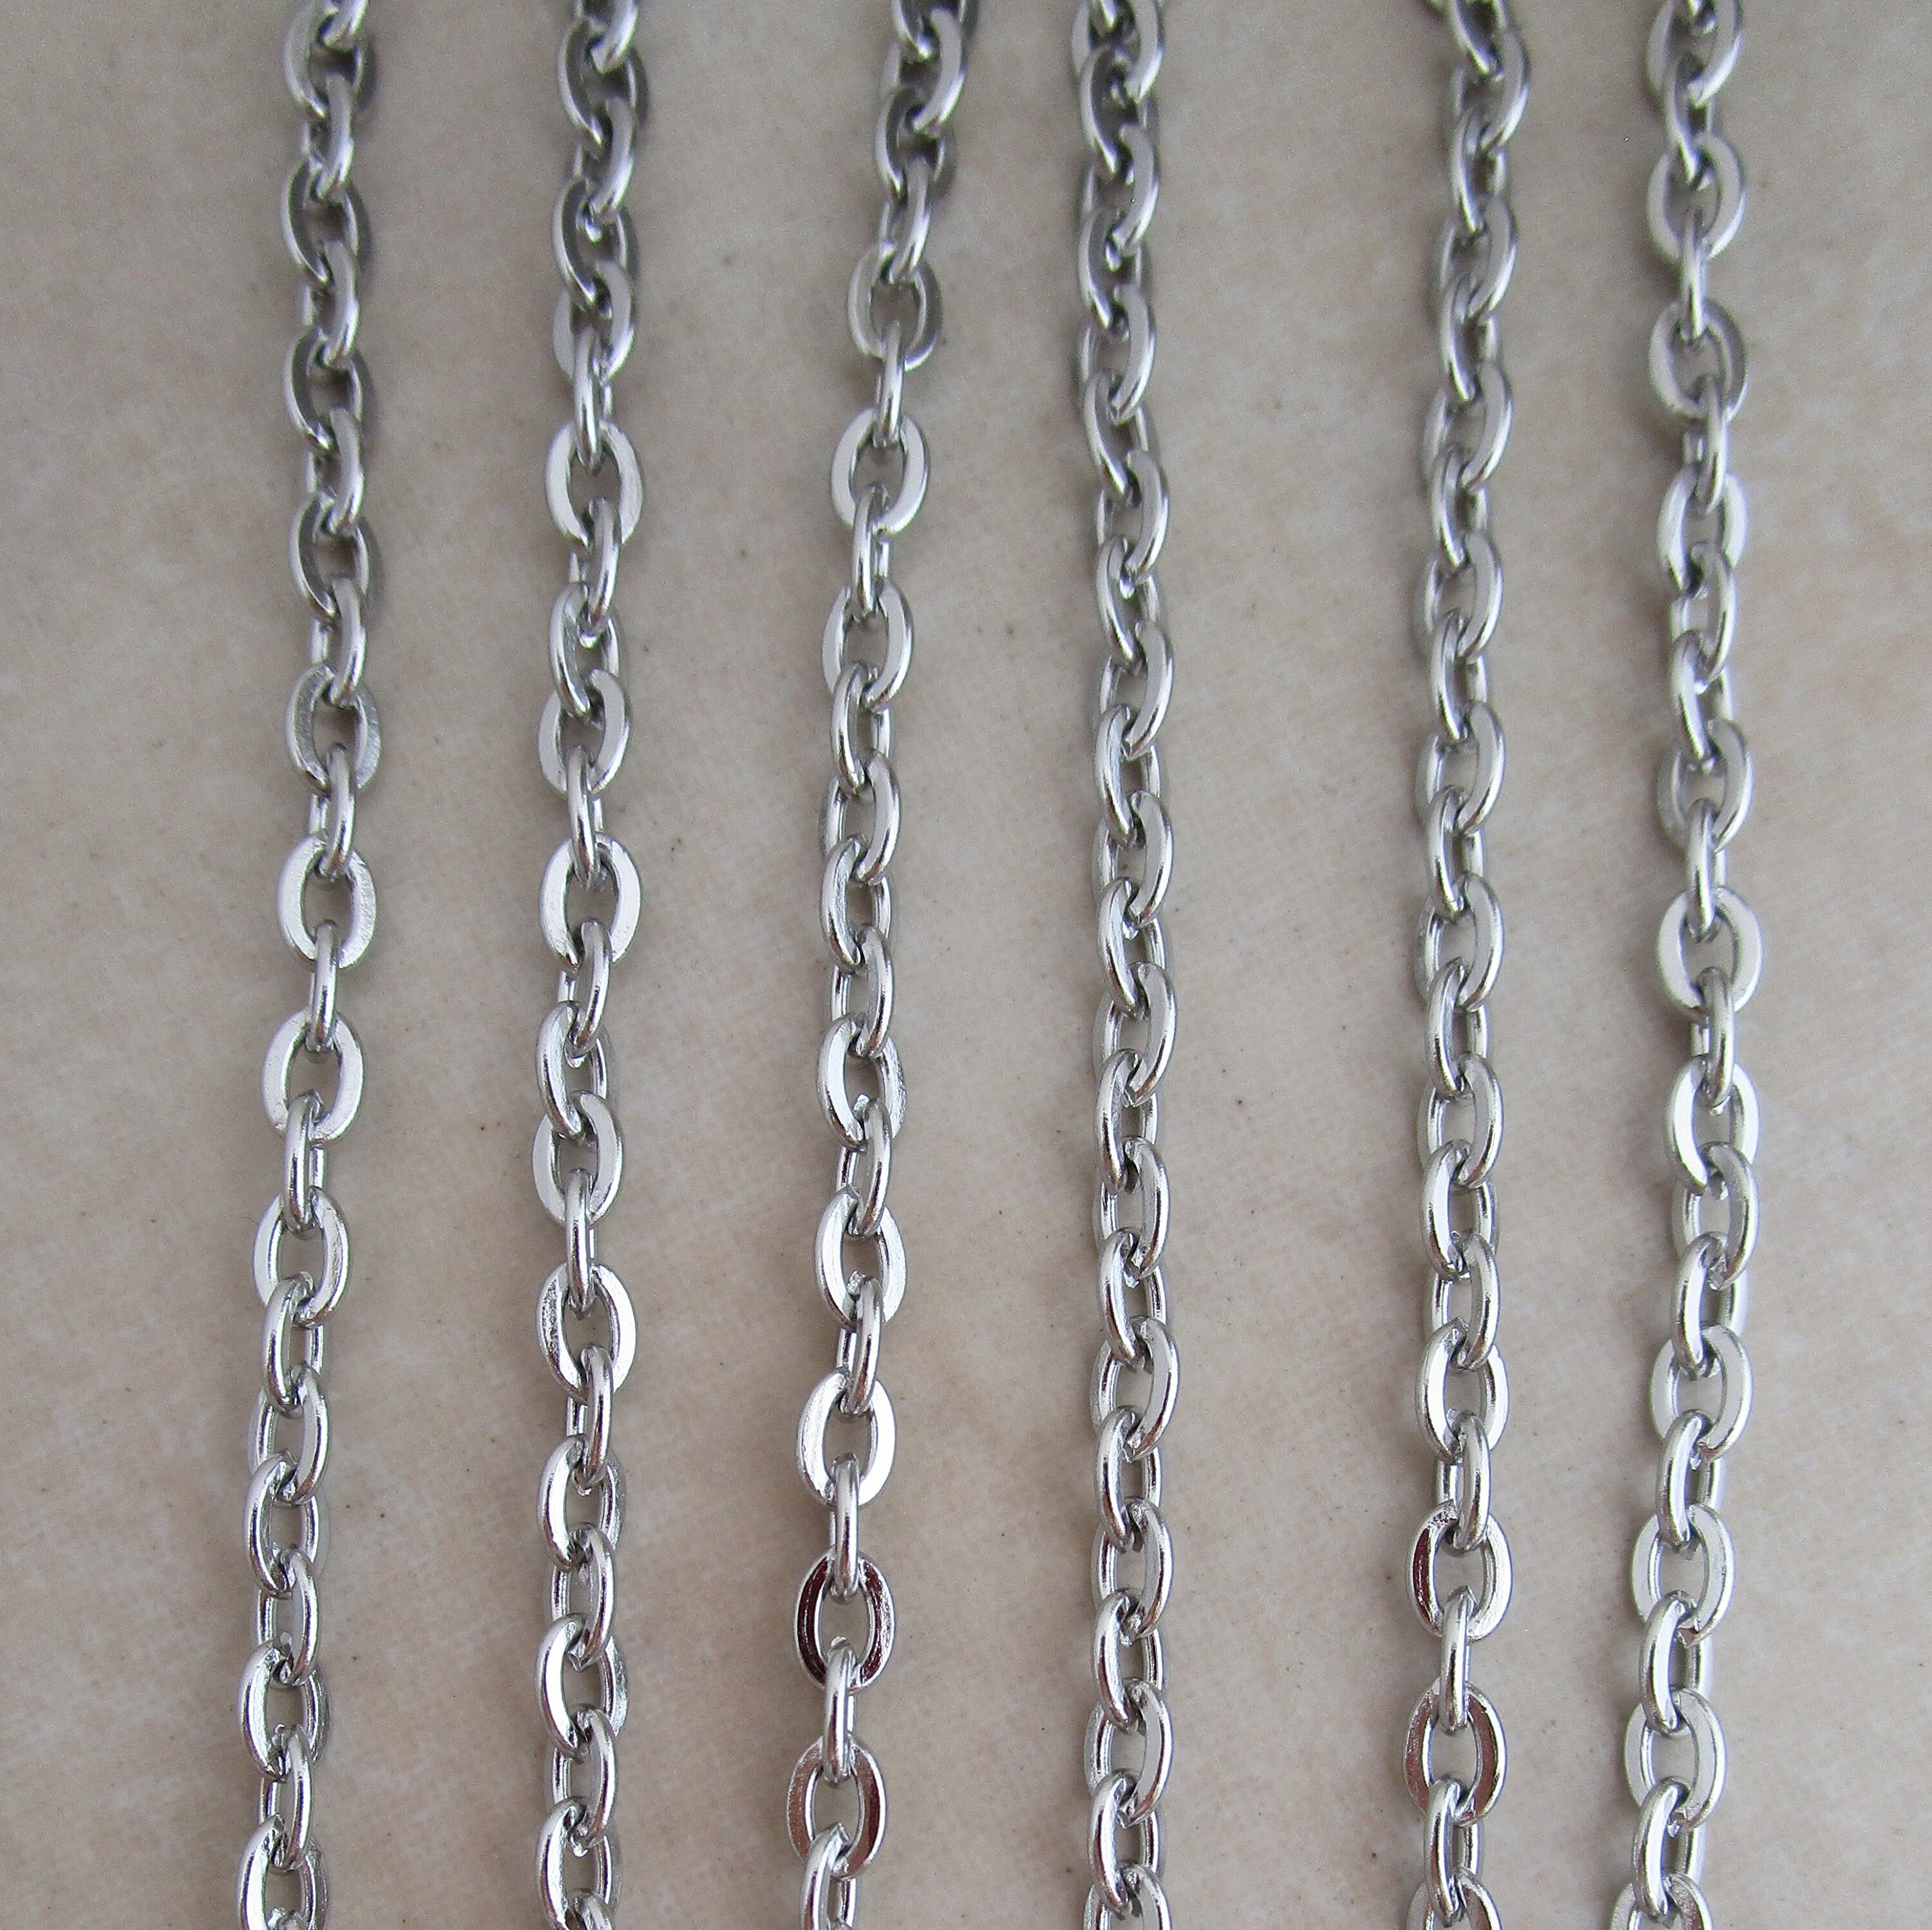 Stainless Steel Chain Bulk, 30 Ft of Surgical Stainless Steel Sturdy Chunky  Big Heavy Cable Chain 8x6mm 1.2mm 16G Unsoldered Link ST86S 